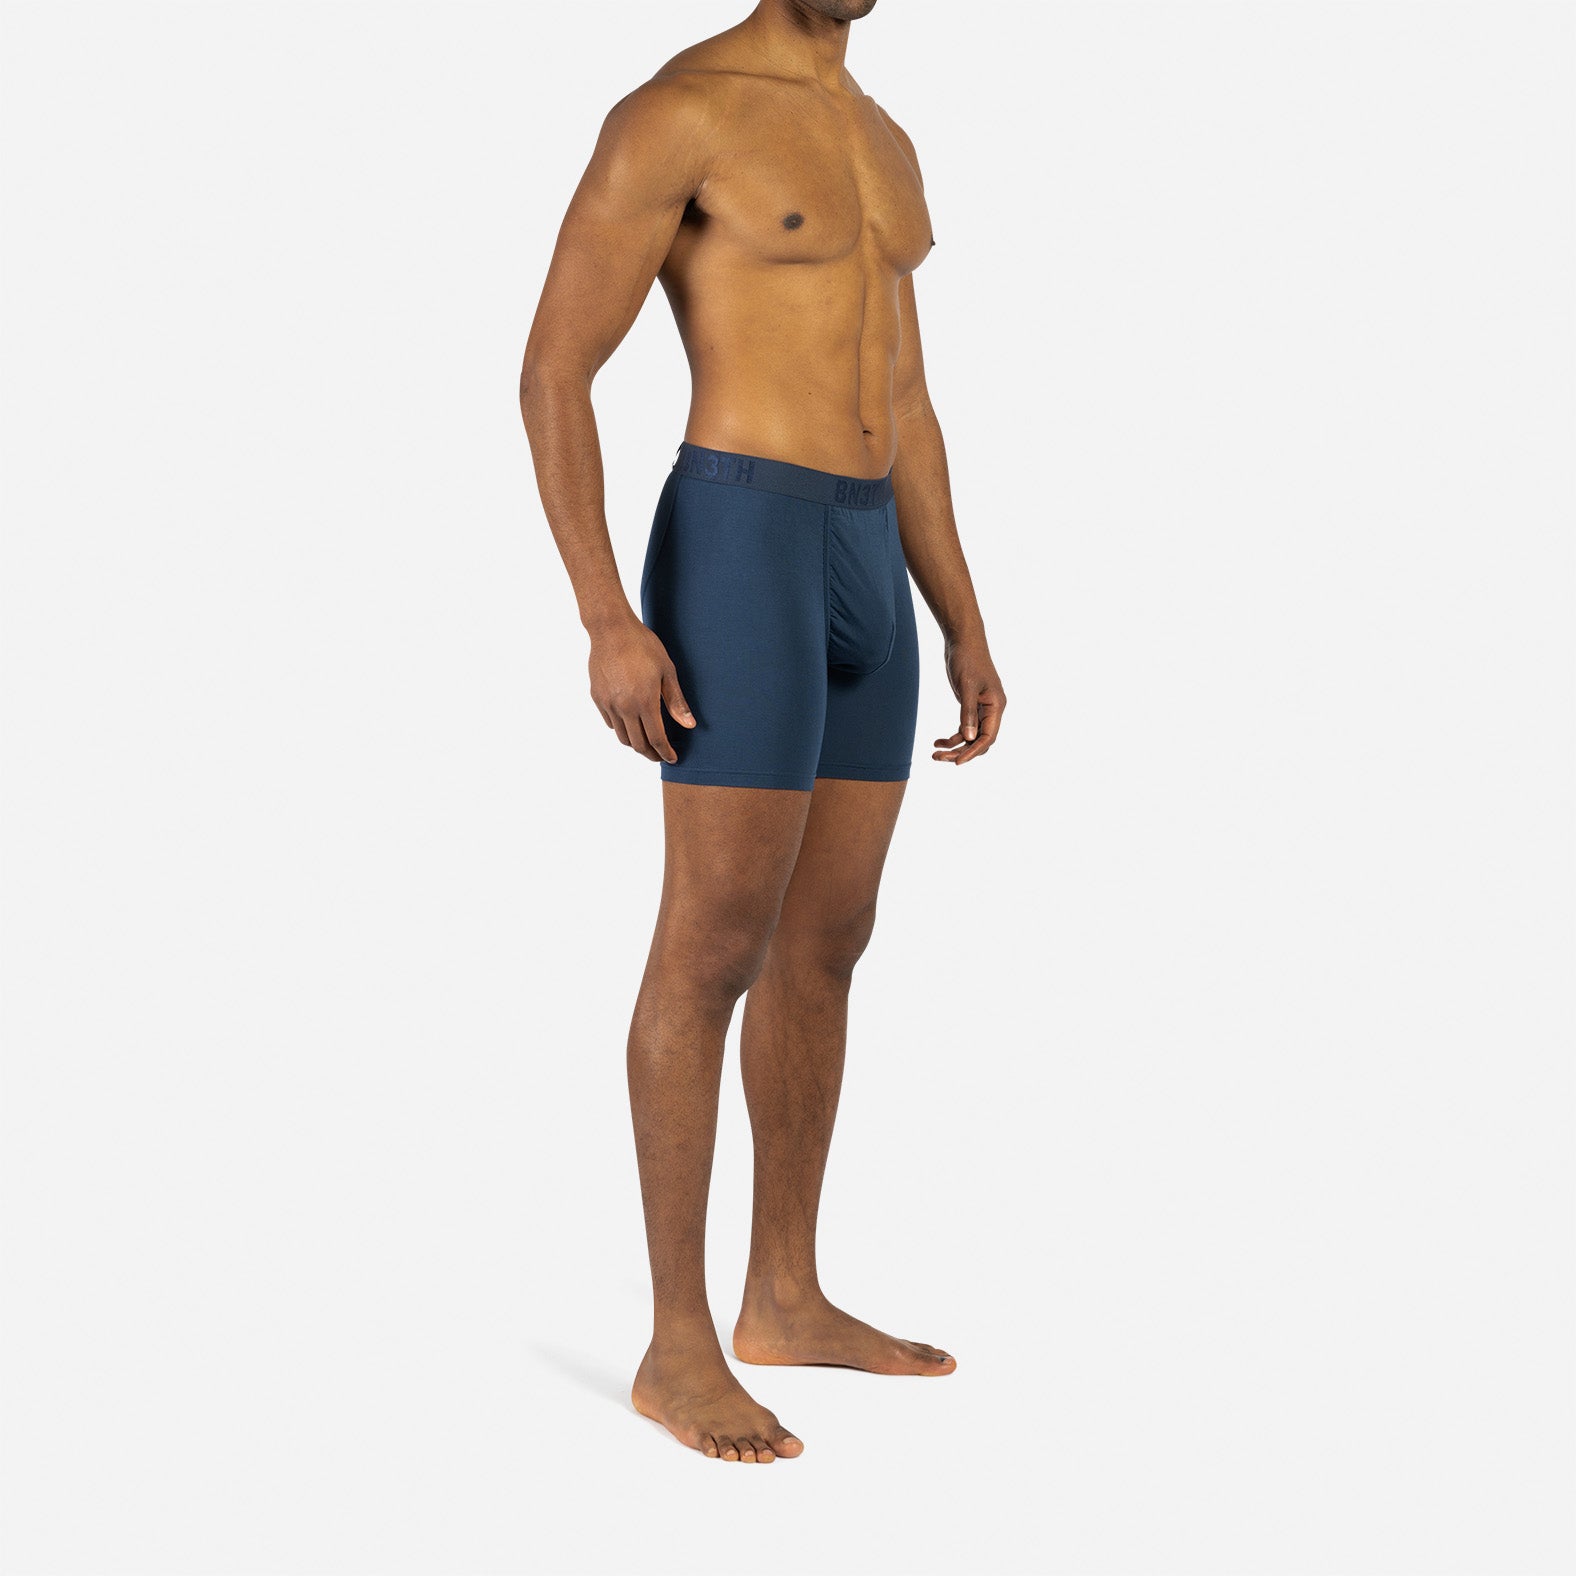 CLASSIC BOXER BRIEF: NAVY 2 PACK